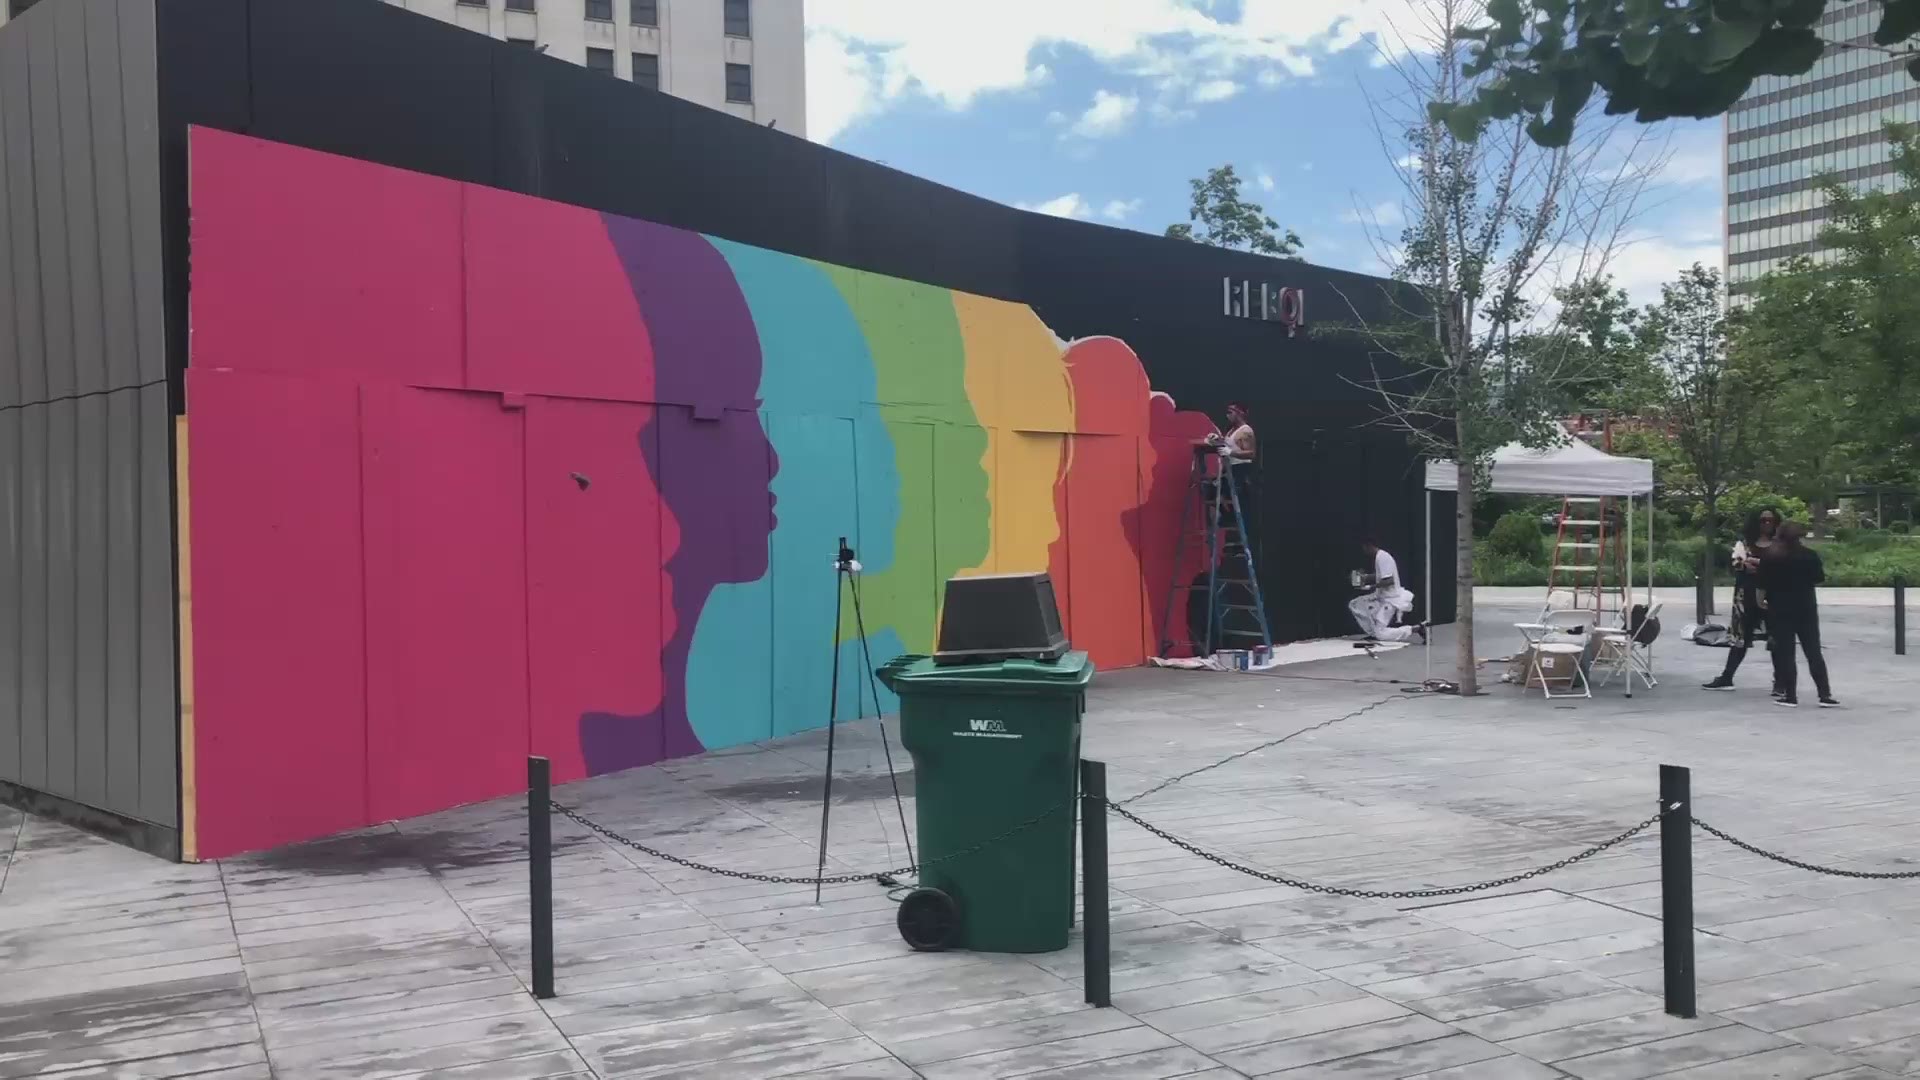 Artists paint mural in Public Square in honor of Black Lives Matter.